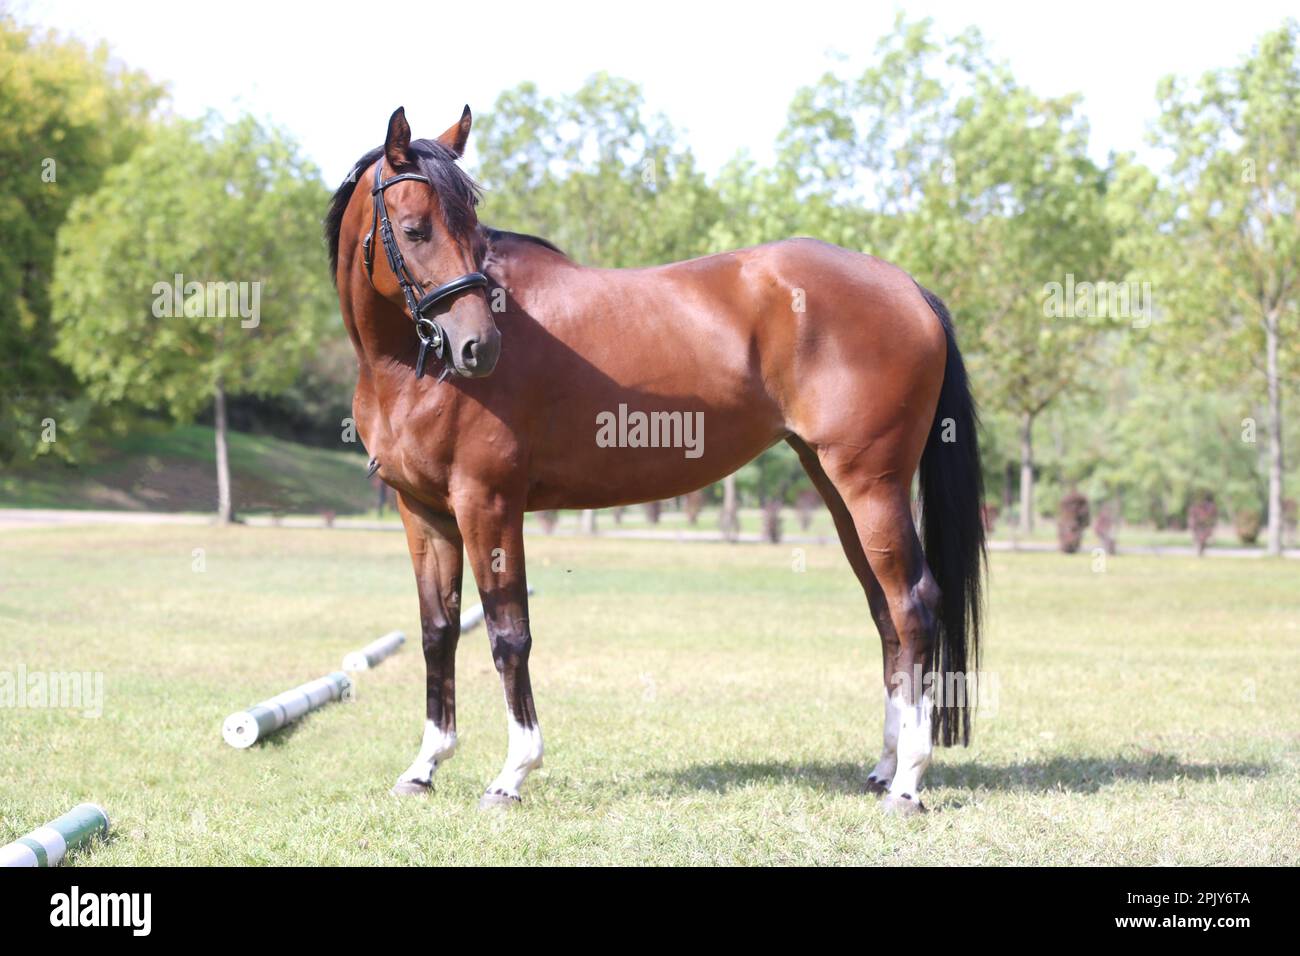 Beautiful young stallion posing at rural animal farm on horse show summertime Stock Photo